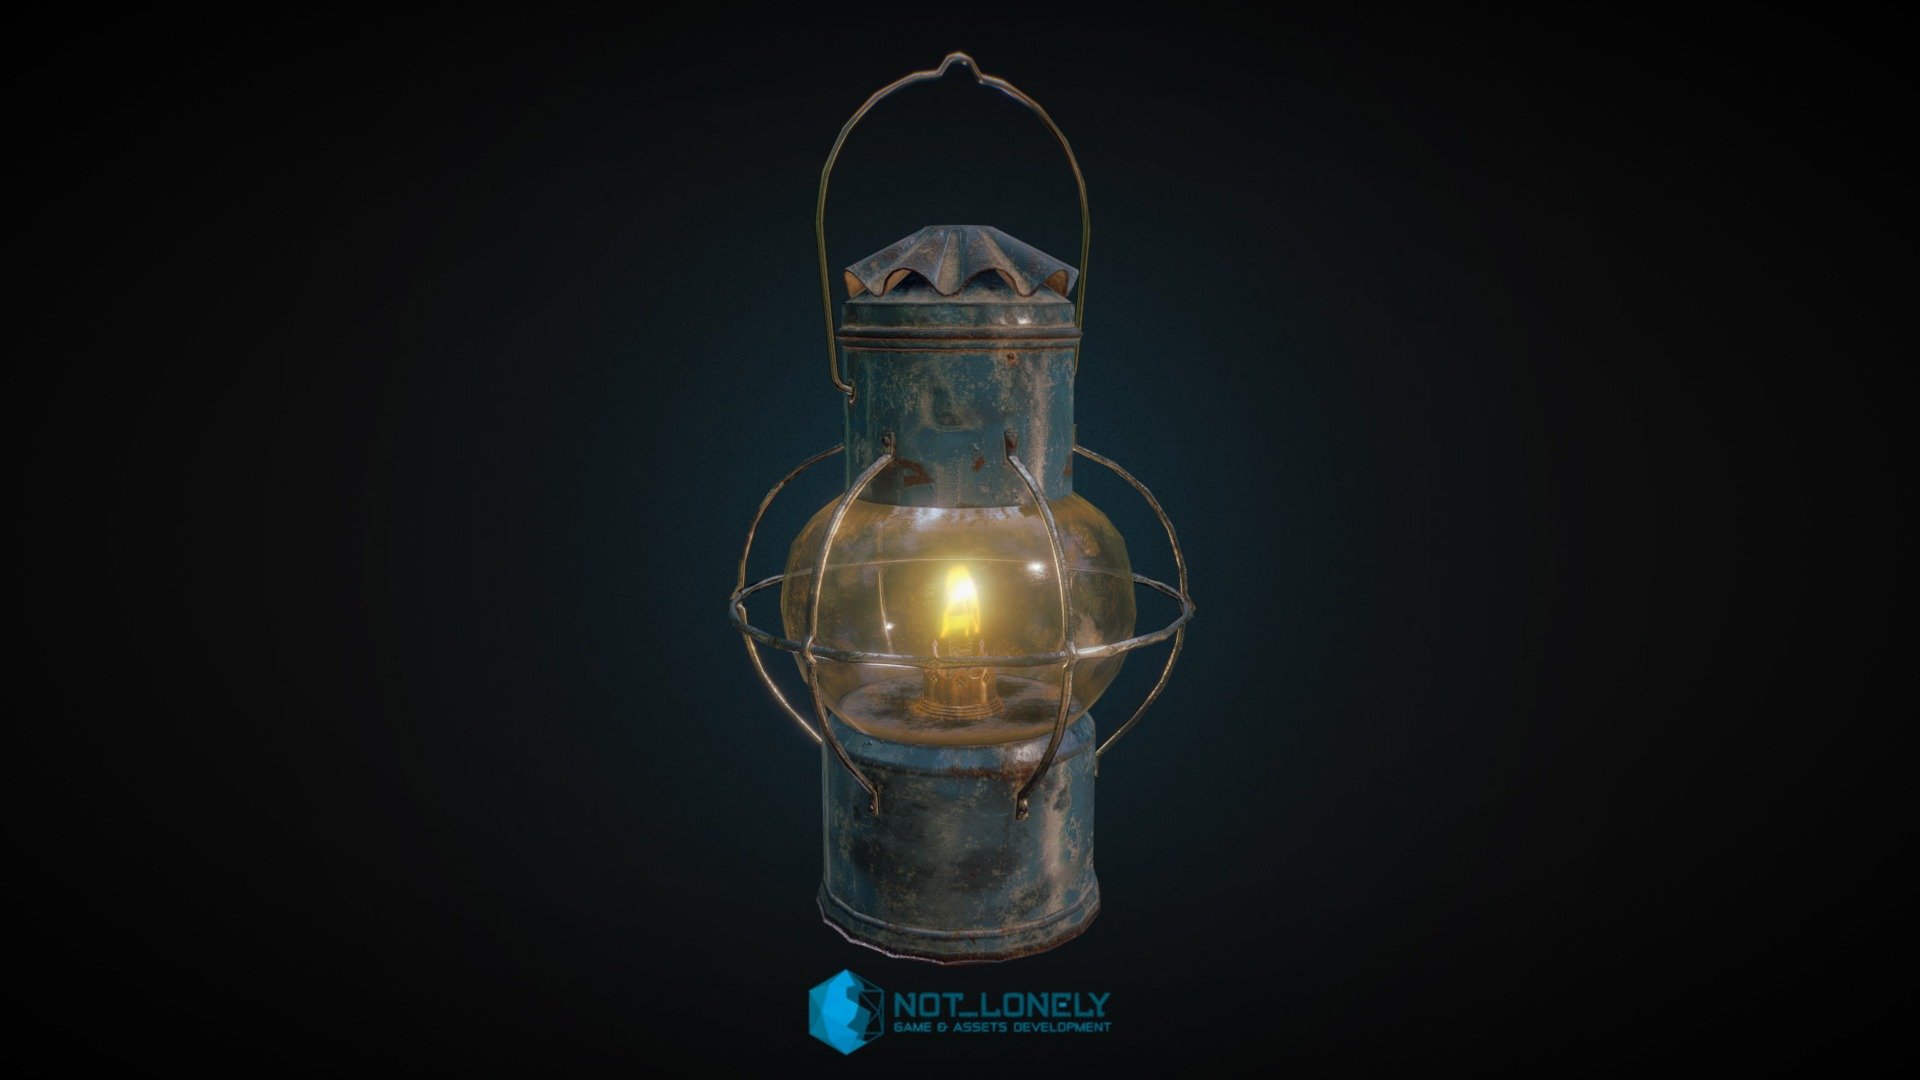 Lantern from my new art game asset: http://not-lonely.com/assets/hq-western-saloon/ - Oil Lantern - 3D model by NOT_Lonely 3d model